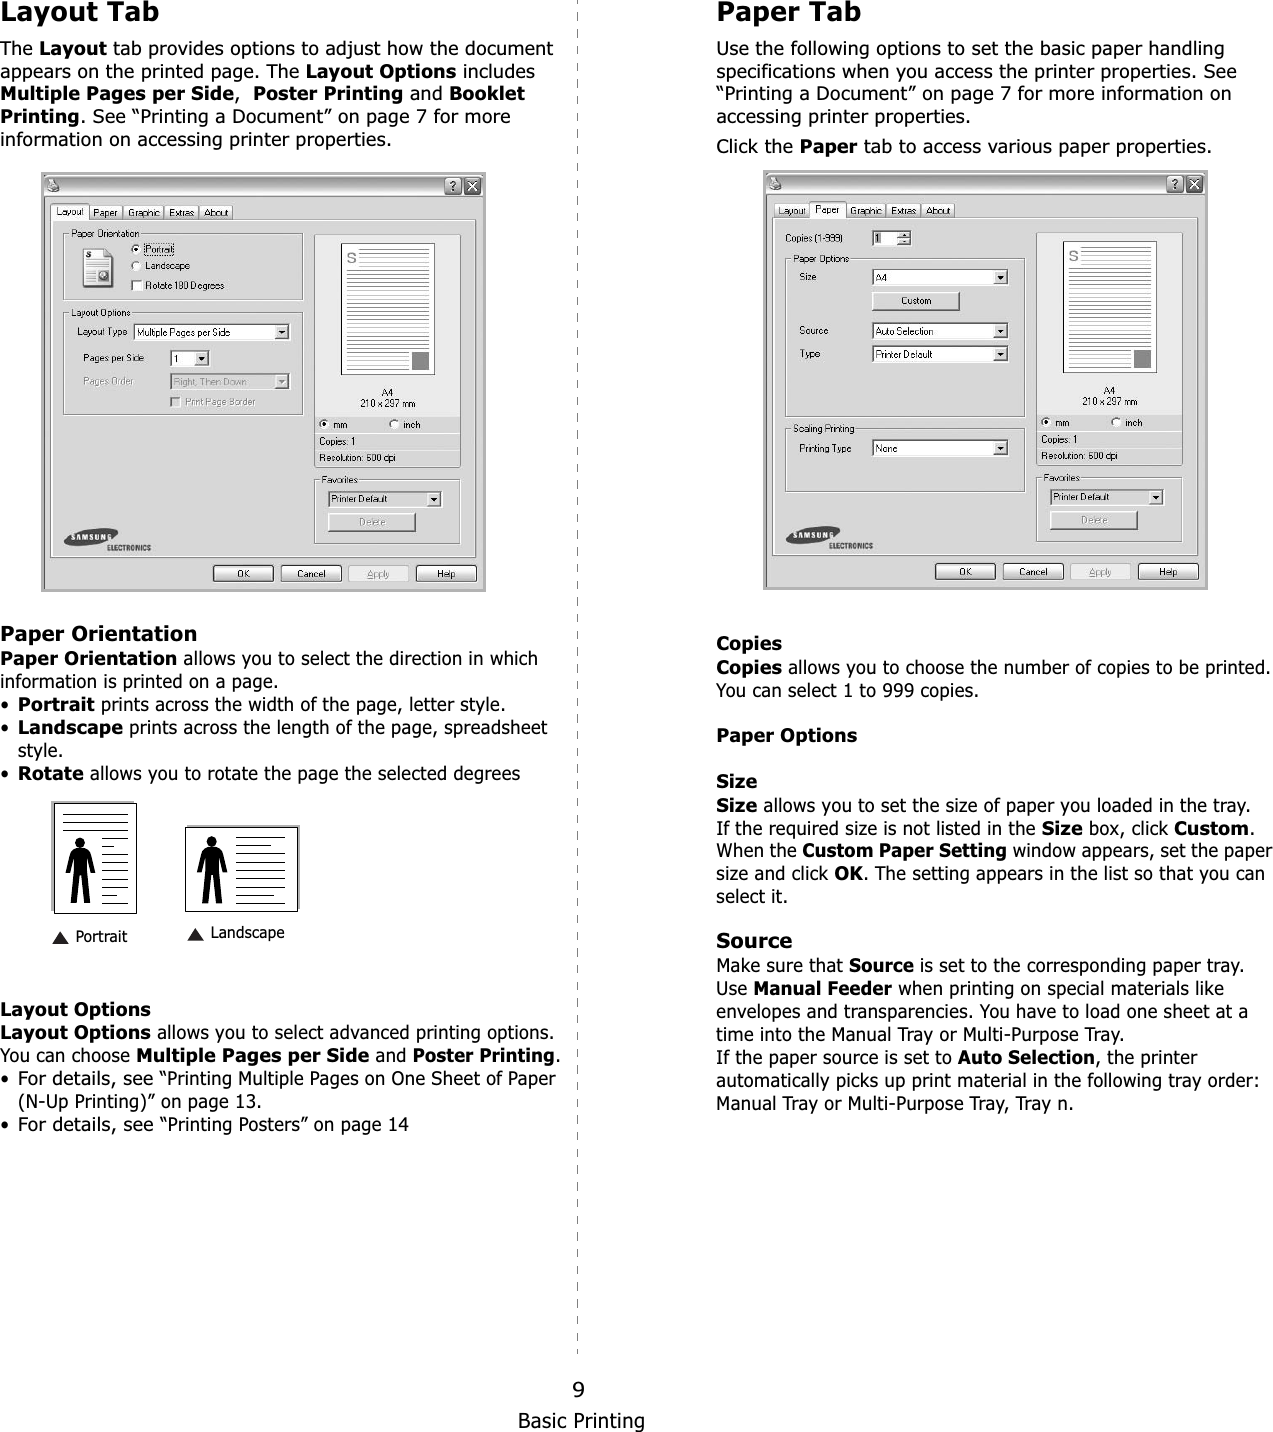 Basic Printing9Layout TabThe Layout tab provides options to adjust how the document appears on the printed page. The Layout Options includes Multiple Pages per Side,Poster Printing and Booklet Printing. See “Printing a Document” on page 7 for more information on accessing printer properties.  Paper OrientationPaper Orientation allows you to select the direction in which information is printed on a page. •Portrait prints across the width of the page, letter style. •Landscape prints across the length of the page, spreadsheet style. •Rotate allows you to rotate the page the selected degreesLayout OptionsLayout Options allows you to select advanced printing options. You can choose Multiple Pages per Side and Poster Printing.•For details, see “Printing Multiple Pages on One Sheet of Paper (N-Up Printing)” on page 13.•For details, see “Printing Posters” on page 14 Landscape PortraitPaper TabUse the following options to set the basic paper handling specifications when you access the printer properties. See “Printing a Document” on page 7 for more information on accessing printer properties. Click the Paper tab to access various paper properties. CopiesCopies allows you to choose the number of copies to be printed. You can select 1 to 999 copies. Paper OptionsSizeSize allows you to set the size of paper you loaded in the tray. If the required size is not listed in the Size box, click Custom.When the Custom Paper Setting window appears, set the paper size and click OK. The setting appears in the list so that you can select it. SourceMake sure that Source is set to the corresponding paper tray.UseManual Feeder when printing on special materials like envelopes and transparencies. You have to load one sheet at a time into the Manual Tray or Multi-Purpose Tray.If the paper source is set to Auto Selection, the printer automatically picks up print material in the following tray order: Manual Tray or Multi-Purpose Tray, Tray n.